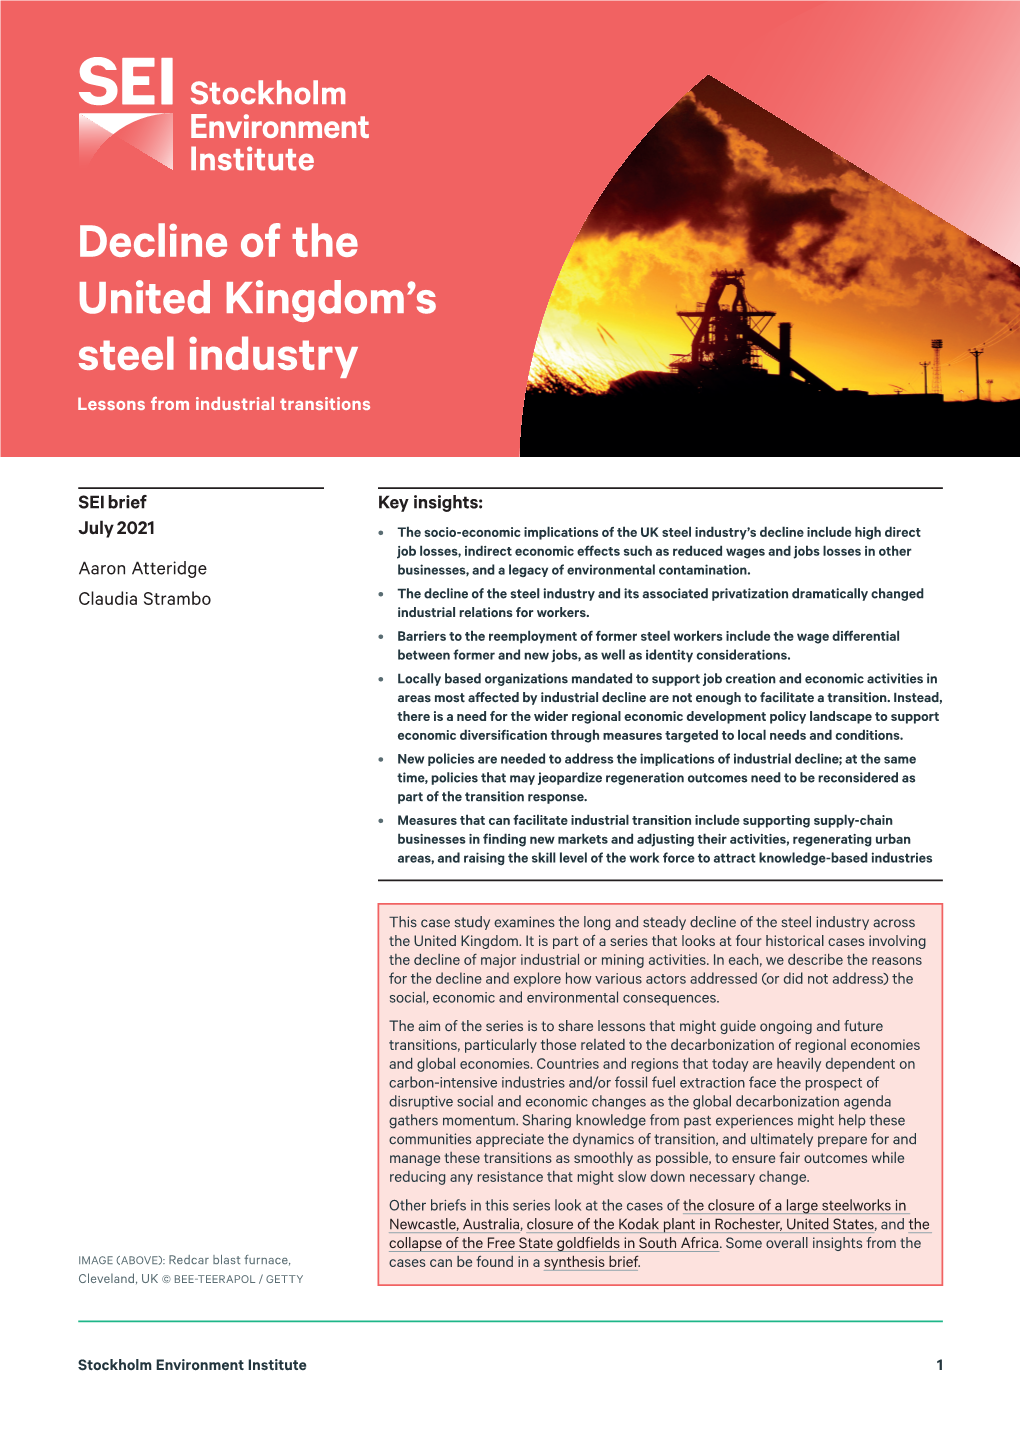 Decline of the United Kingdom's Steel Industry